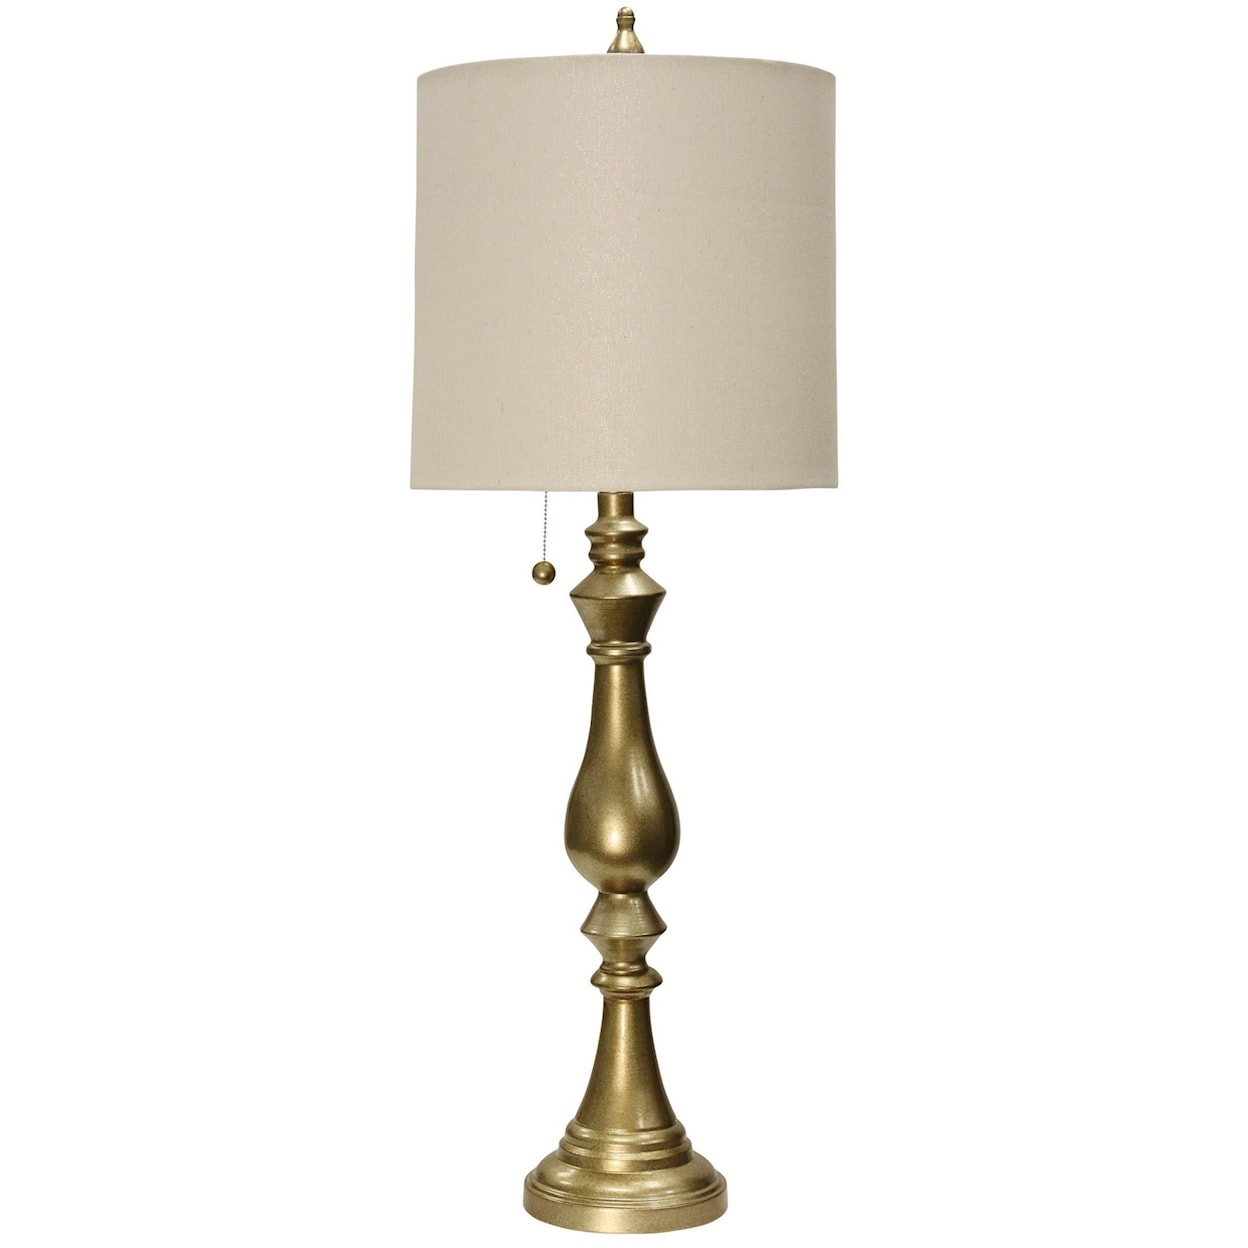 StyleCraft Lamps Imperial Silver Metal Table Lamp